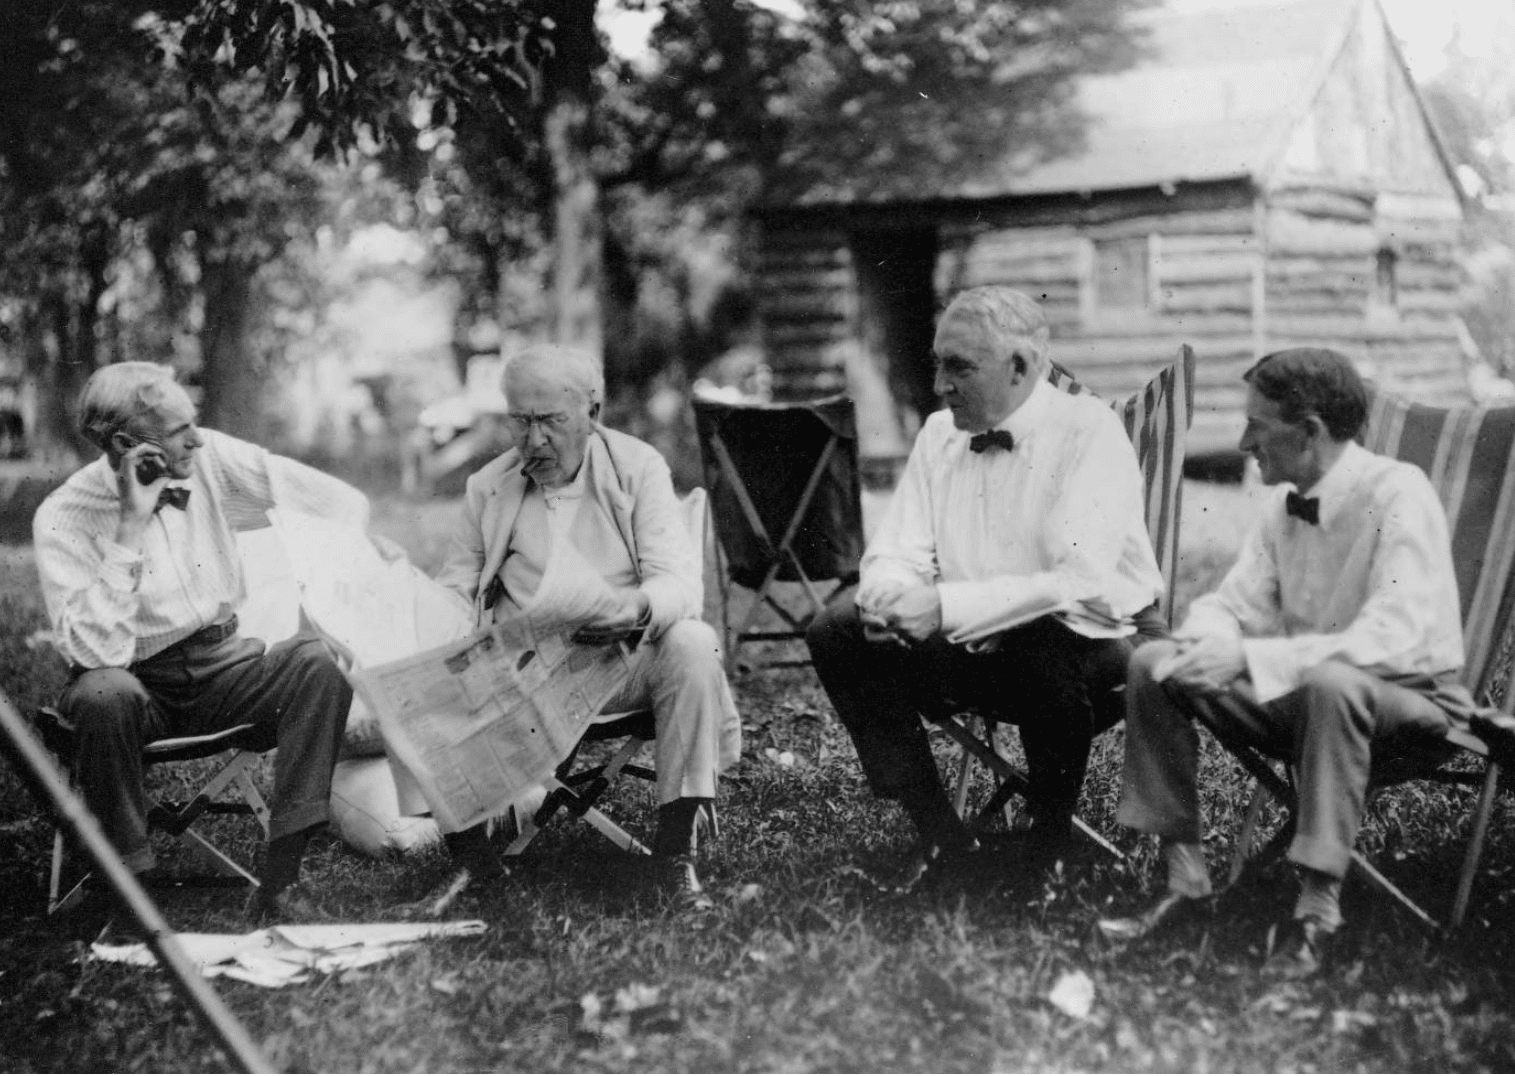 Henry Ford, Thomas Edison, Warren G. Harding and Harvey Firestone seated in camping chairs